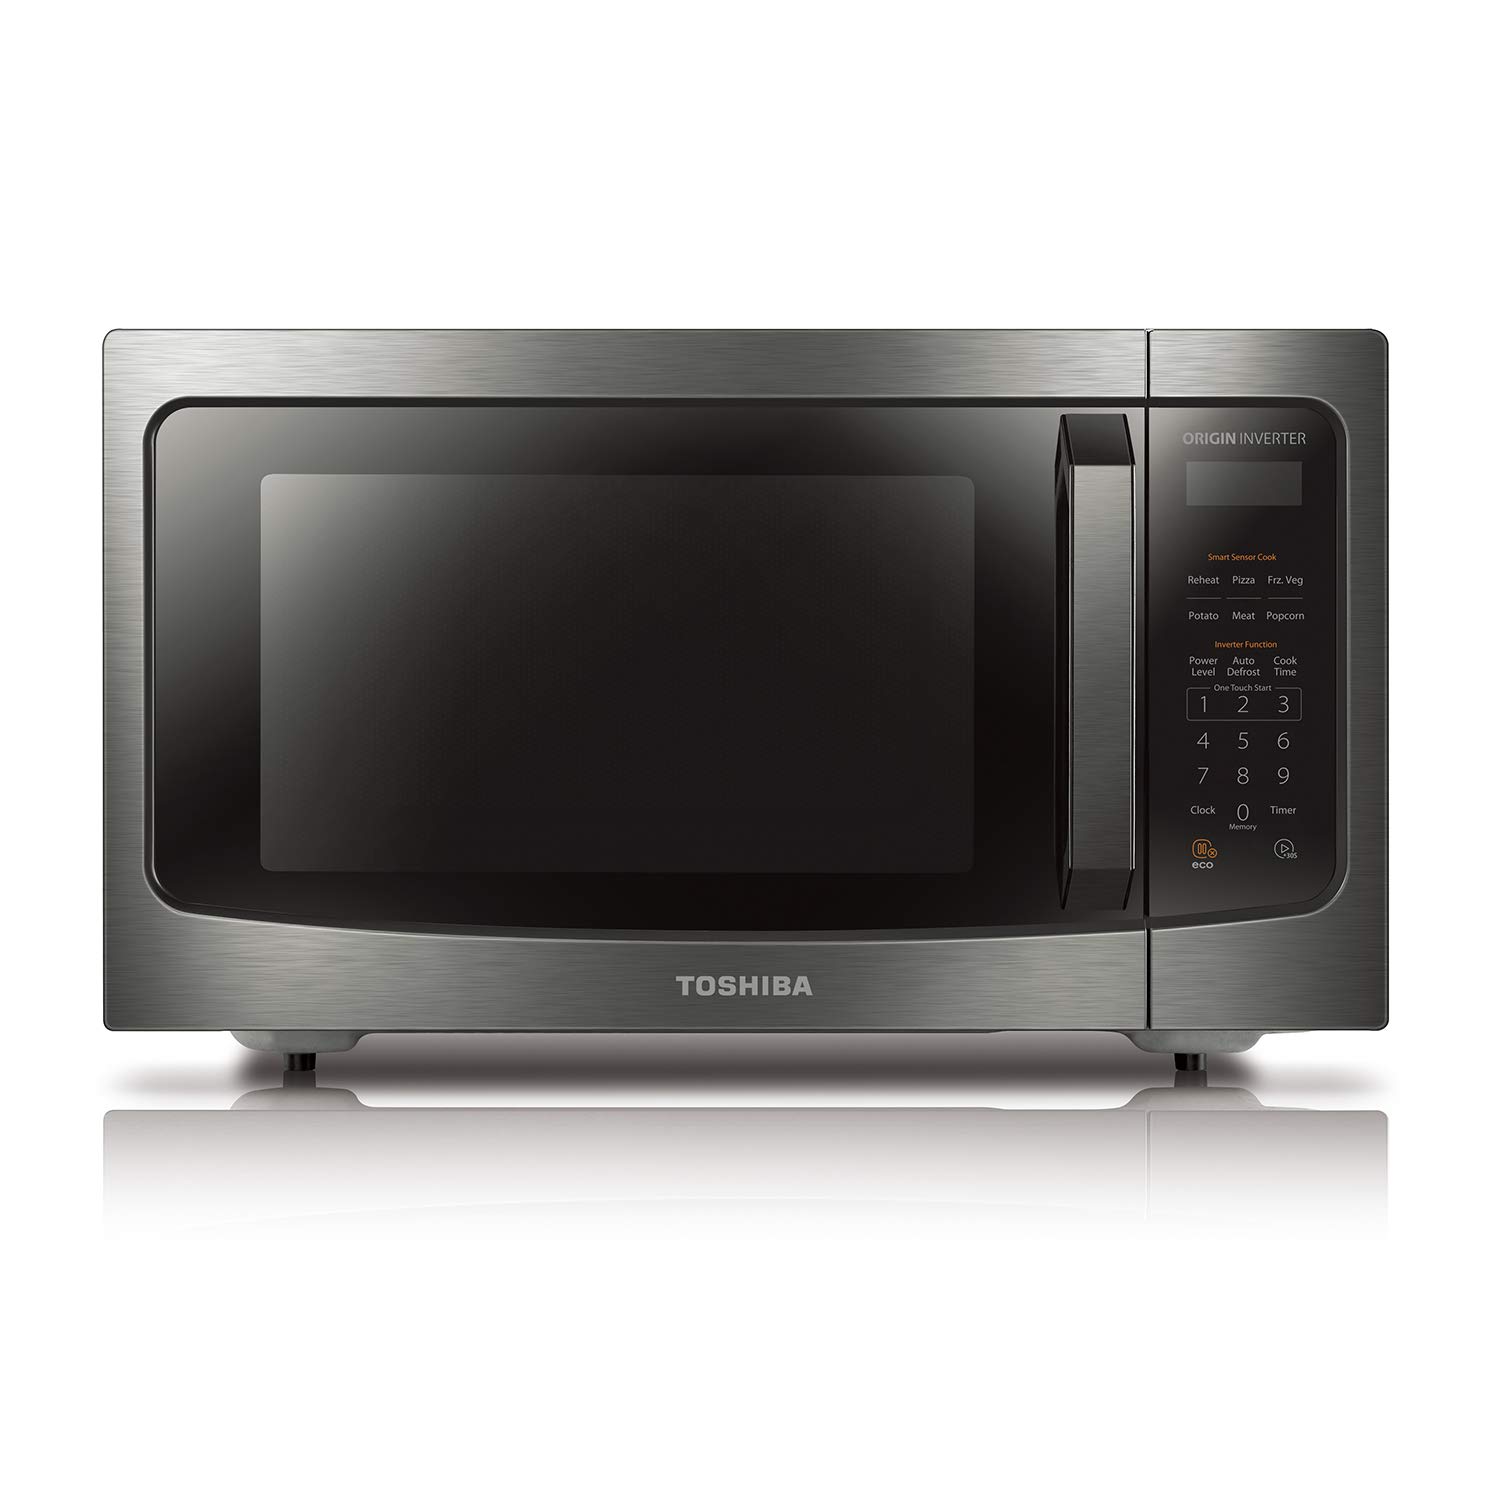 TOSHIBA ML-EM45PIT(BS) Countertop Microwave Oven with Inverter Technology, Kitchen Essentials, Smart Sensor, Auto Defrost, 1.6 Cu.ft, 13.6